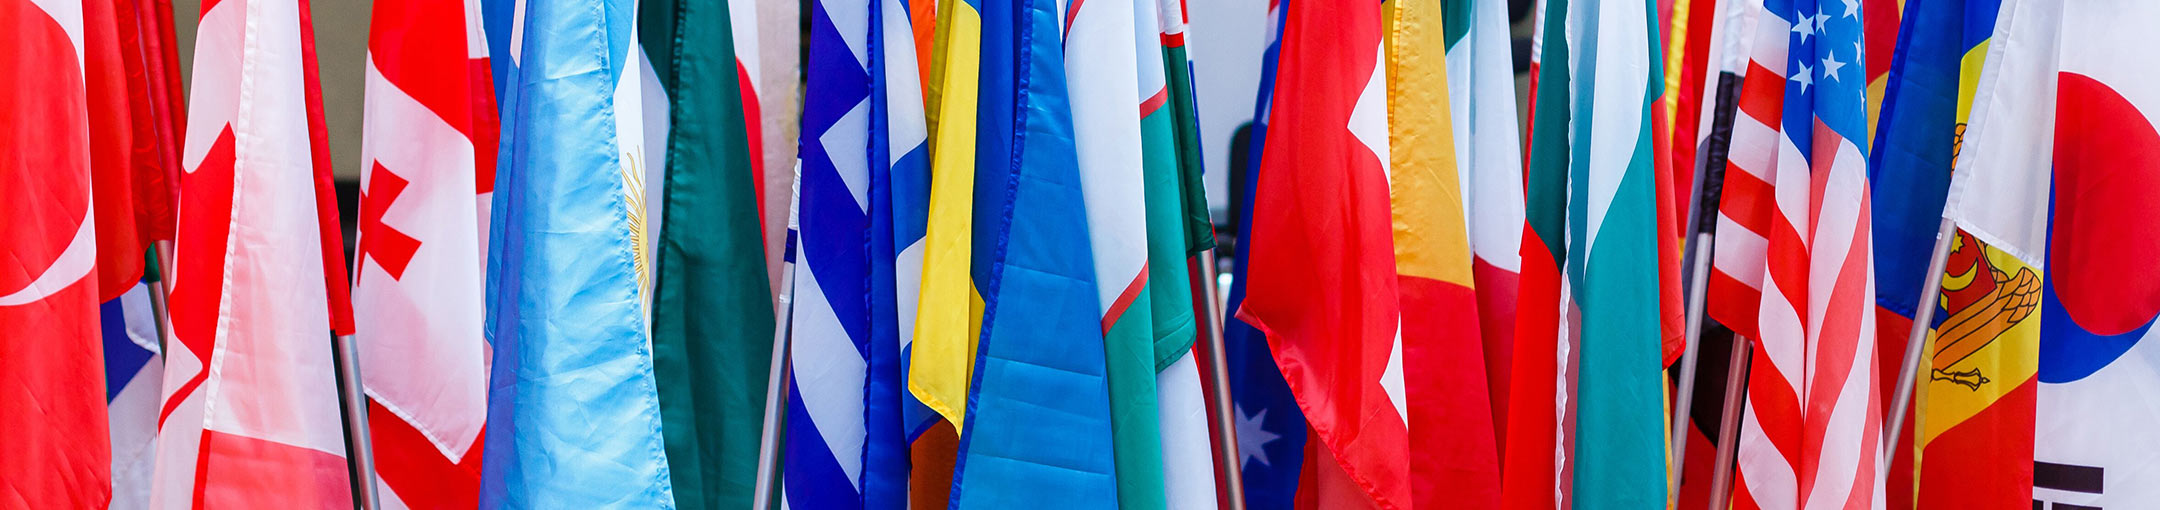 Photo of several colorful international flags in a row